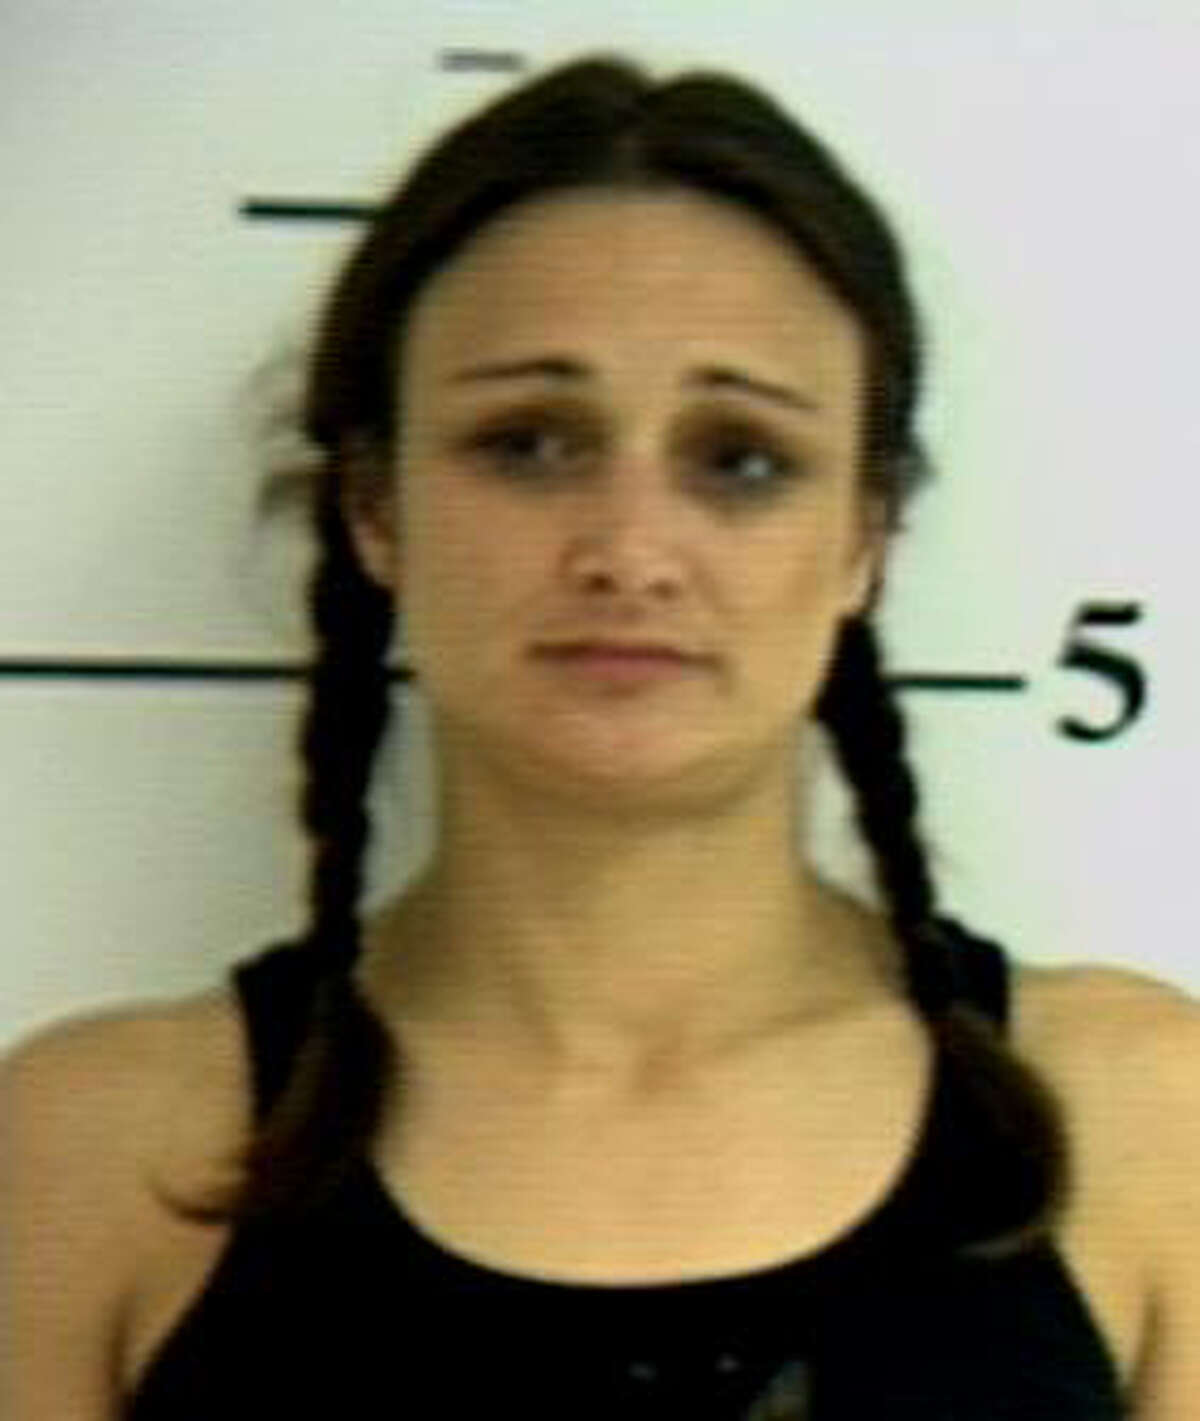 Carrie Wood mugshot, as taken in 2007 by the Angelina County Sheriff's Office. She was later convicted for her role in the death of an Aryan Brotherhood of Texas member and his girlfriend.